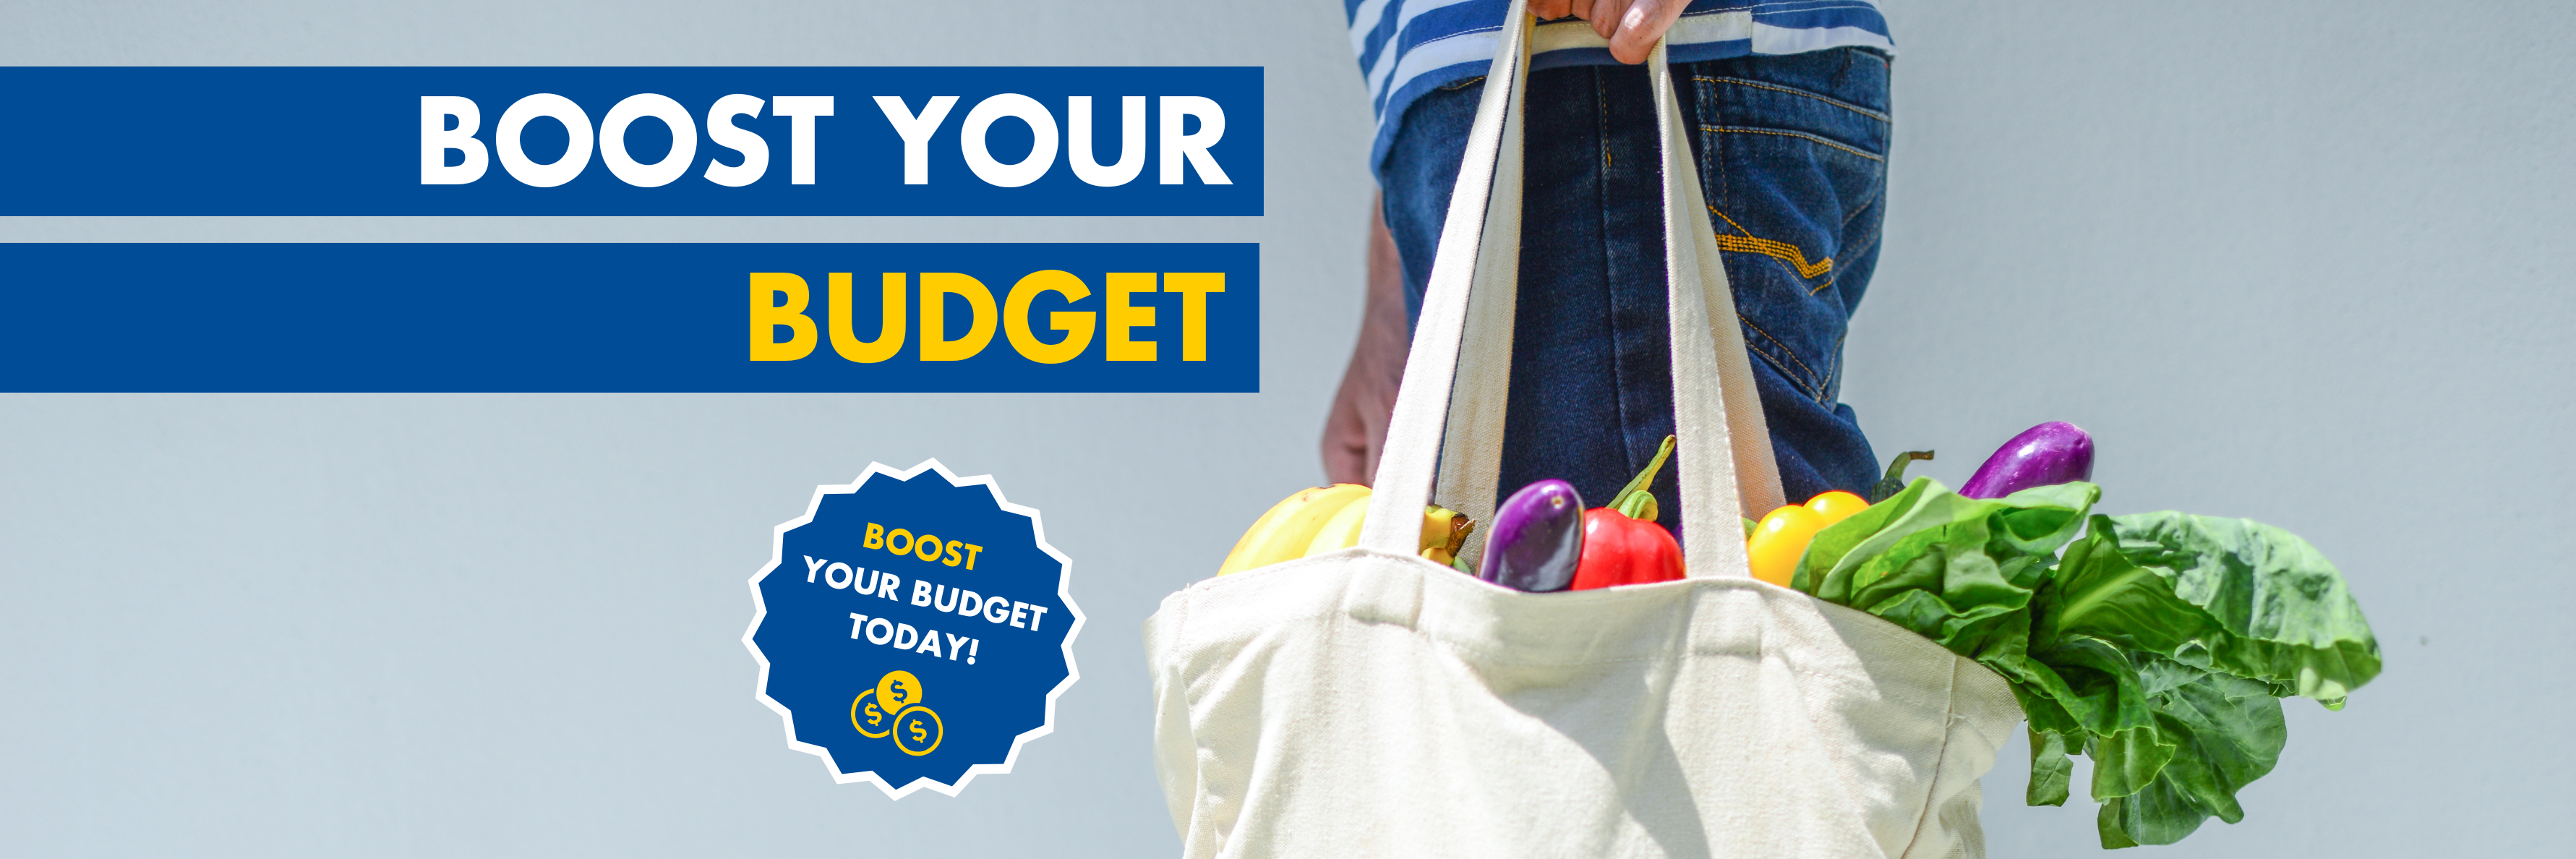 Boost your budget header image